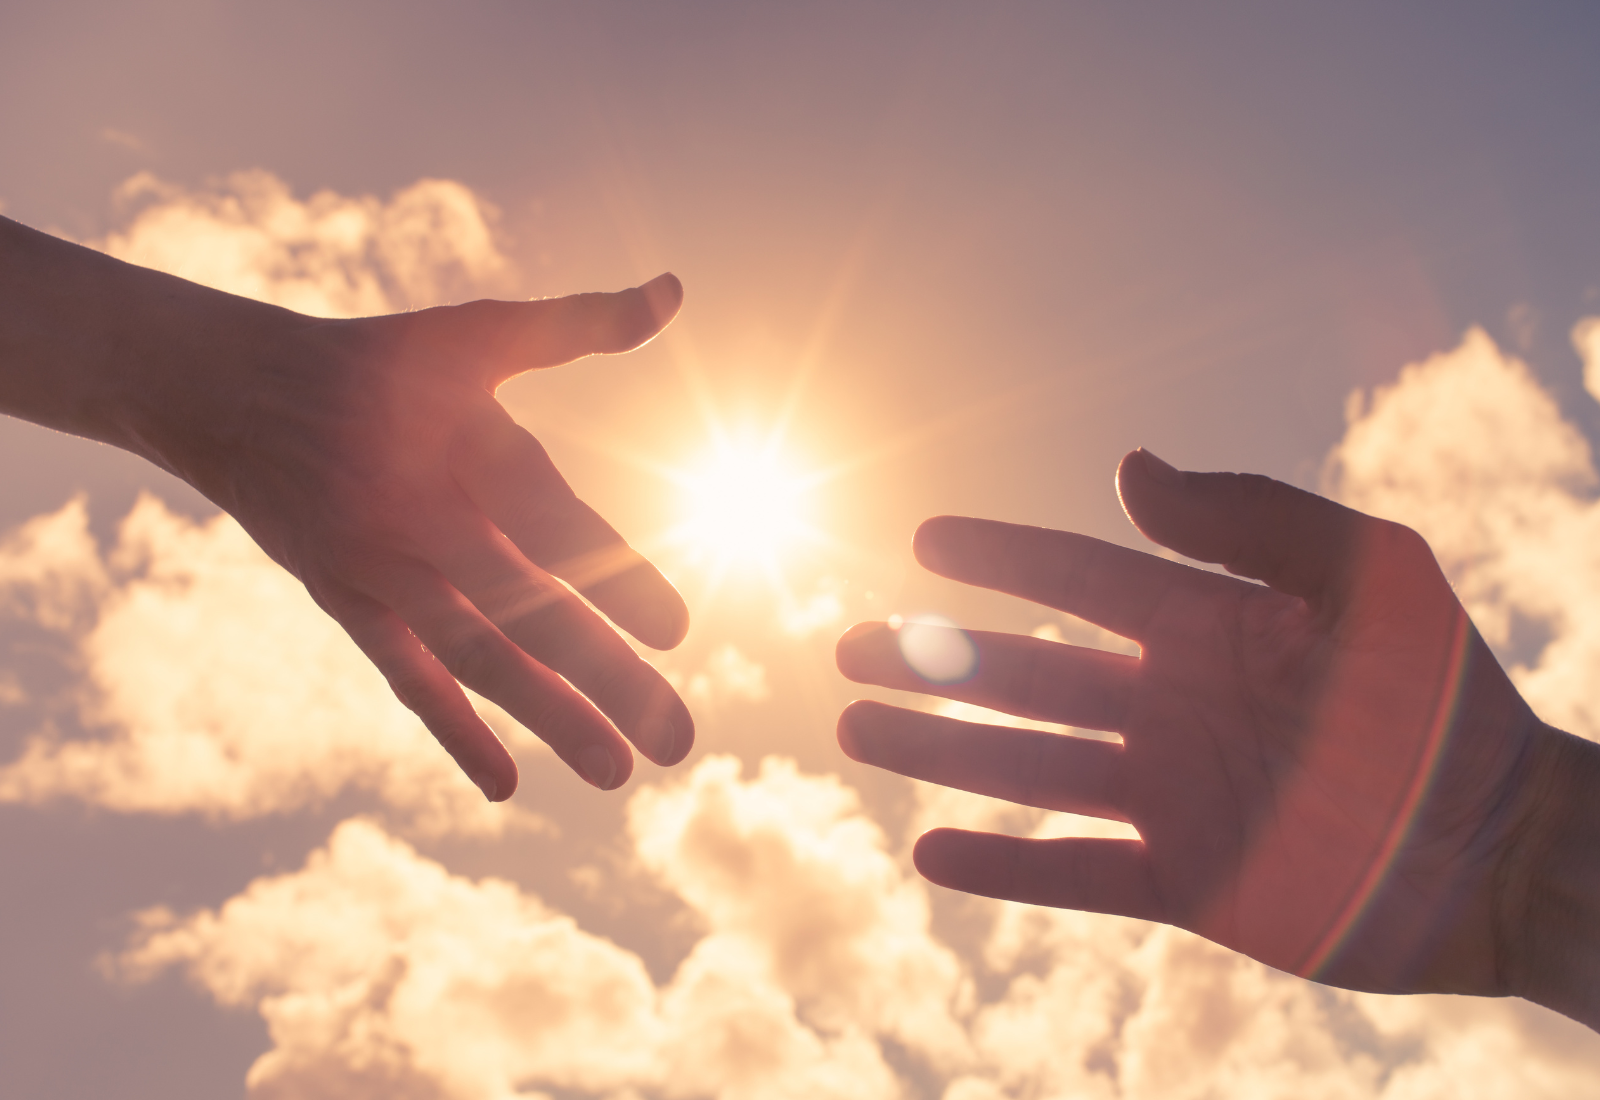 Image of two hands reaching for each other in front of a cloudy sky